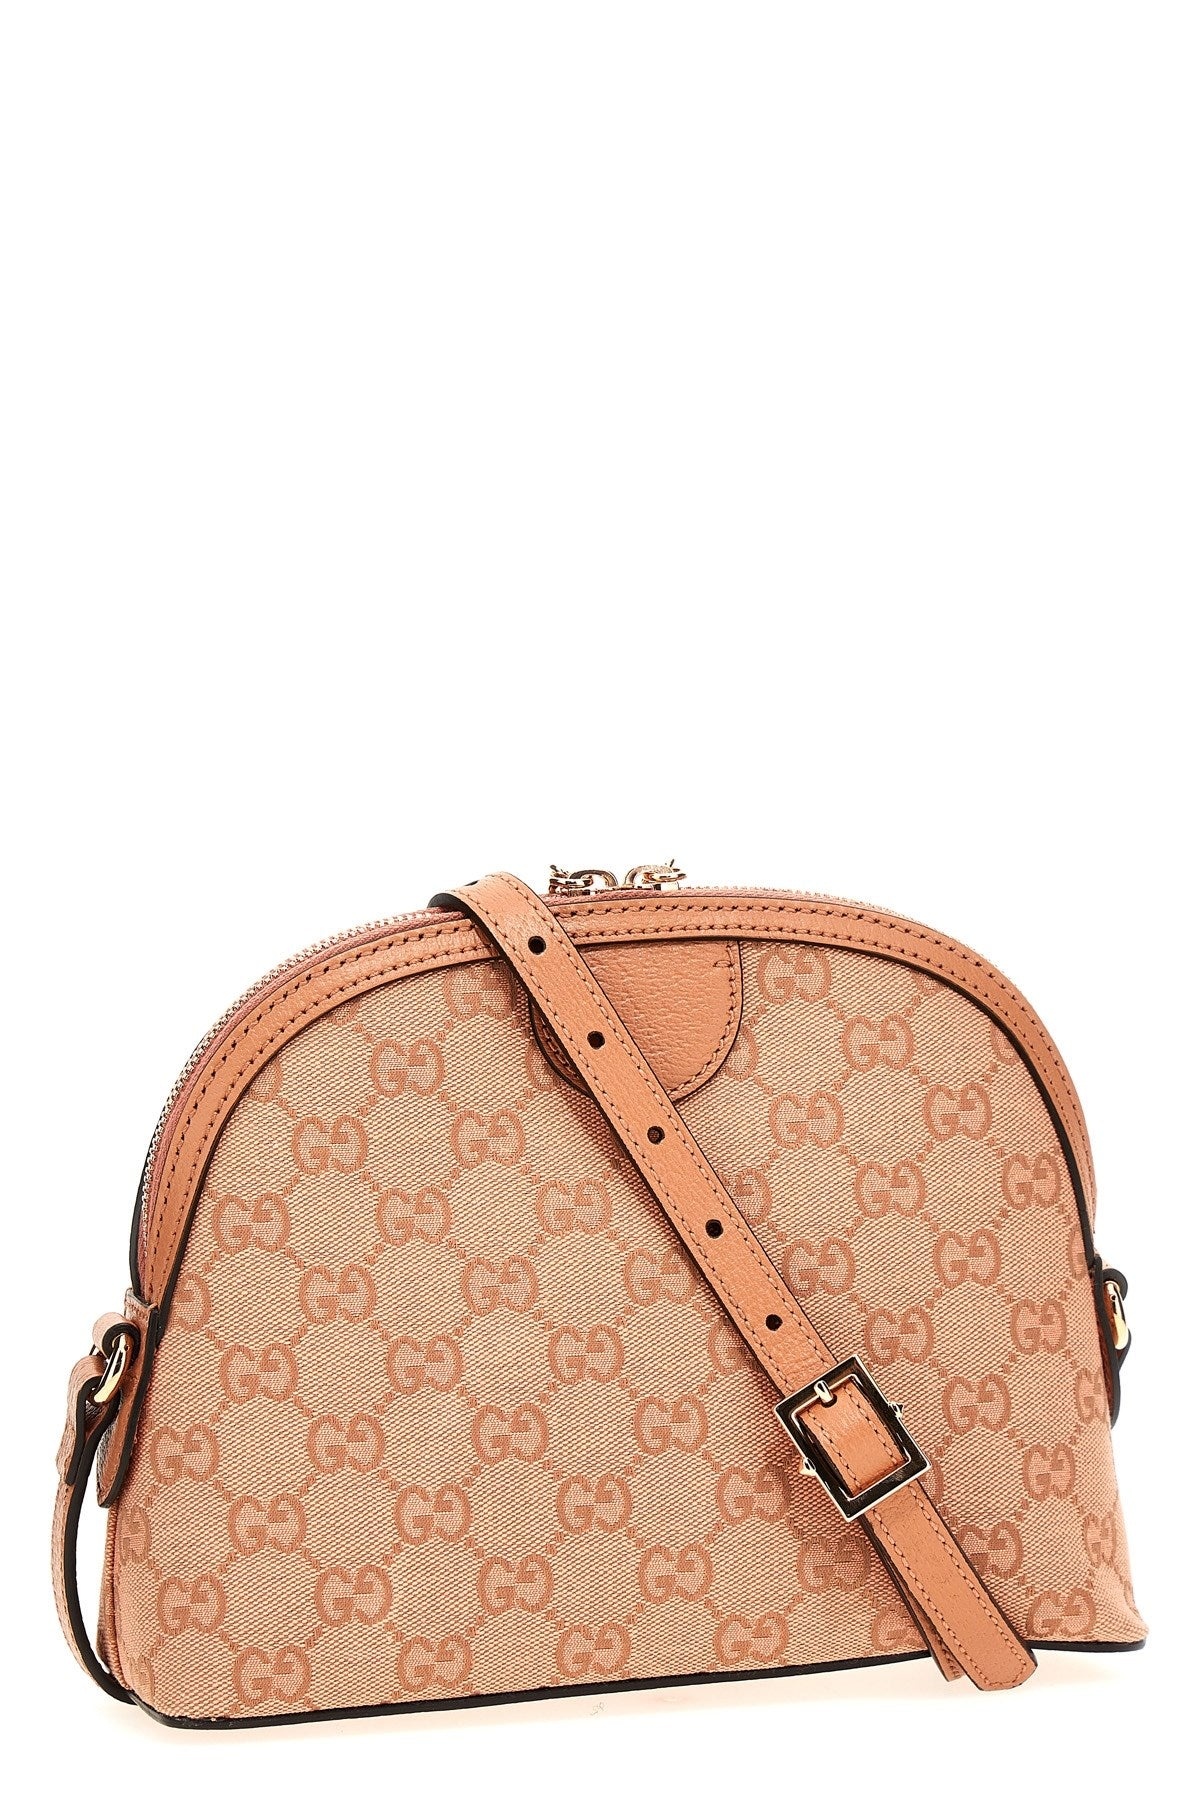 Gucci Women 'Ophidia Gg' Small Shoulder Bag - 2